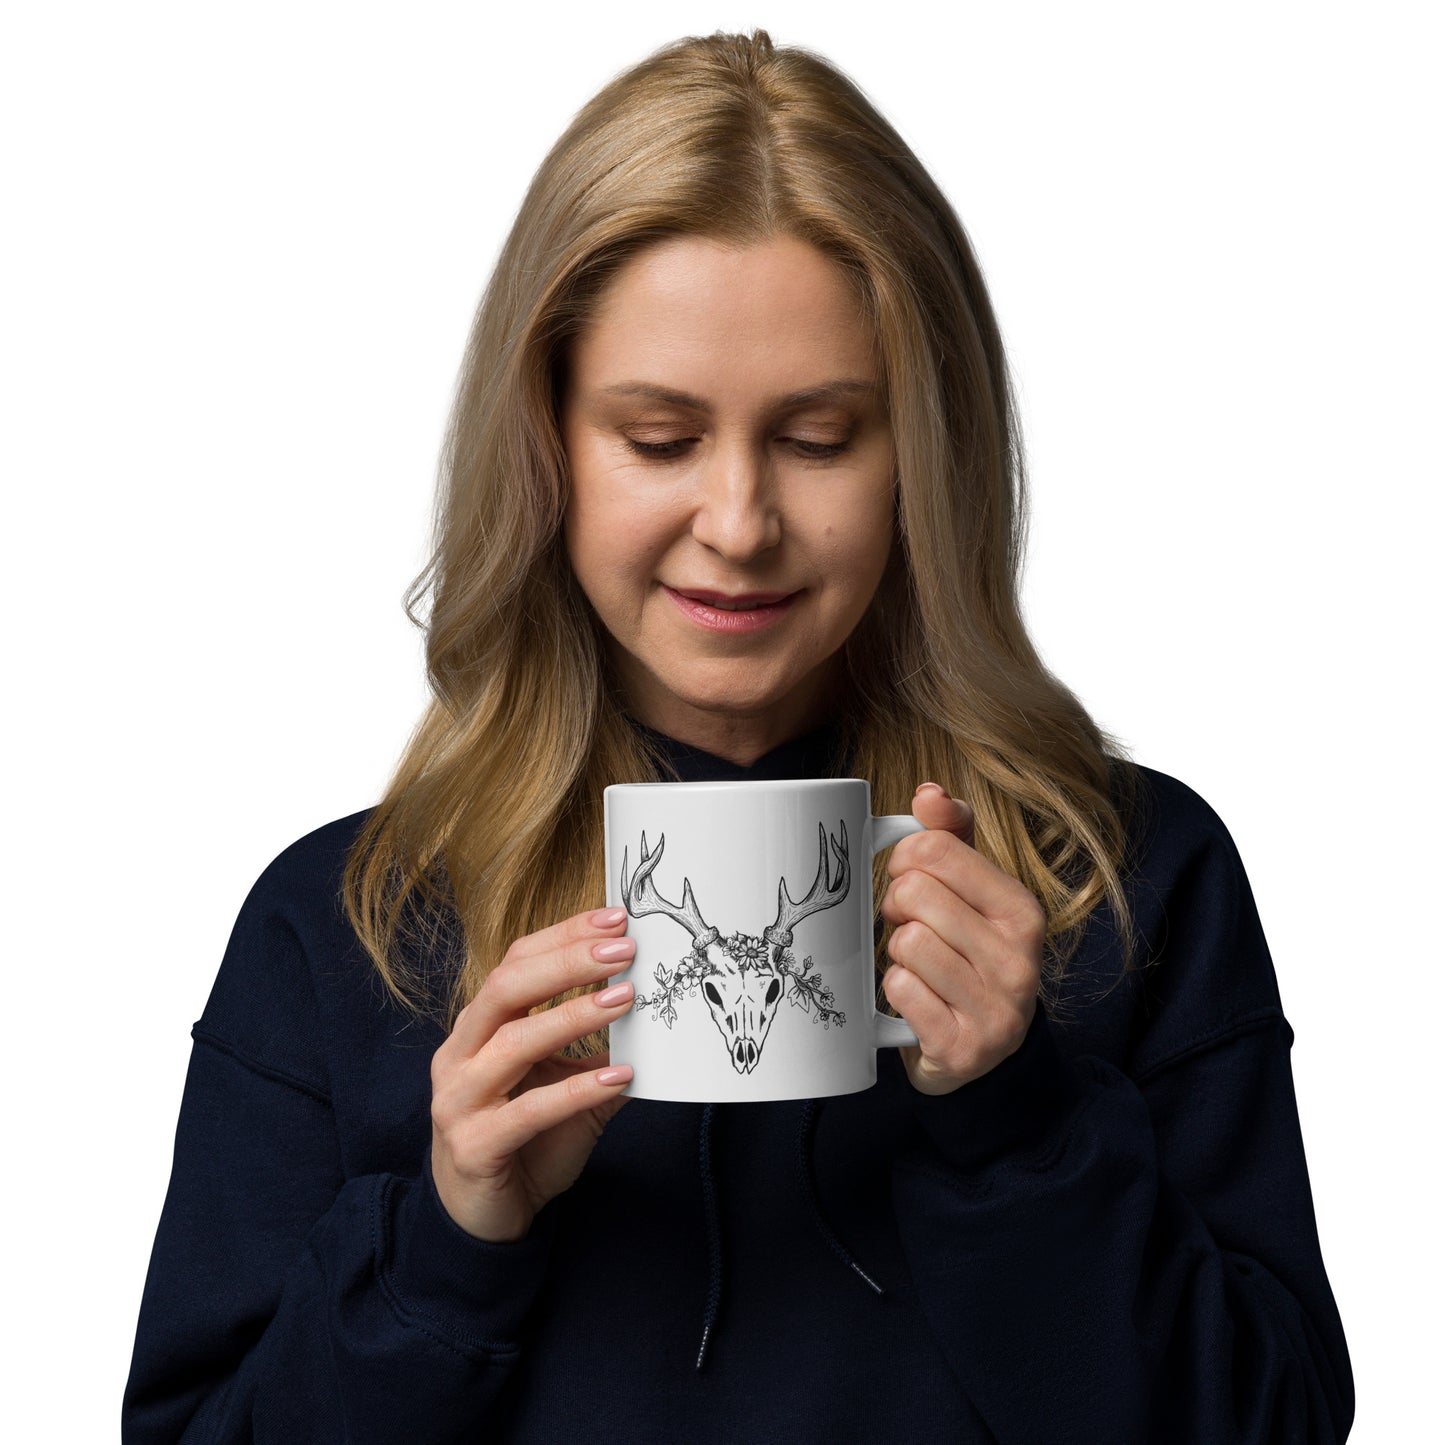 20 ounce white ceramic mug. Features hand-illustrated deer skull wreathed in flowers on one side, and text wildy beautiful, beautifully wild on the other side. Shown in female model's hands.